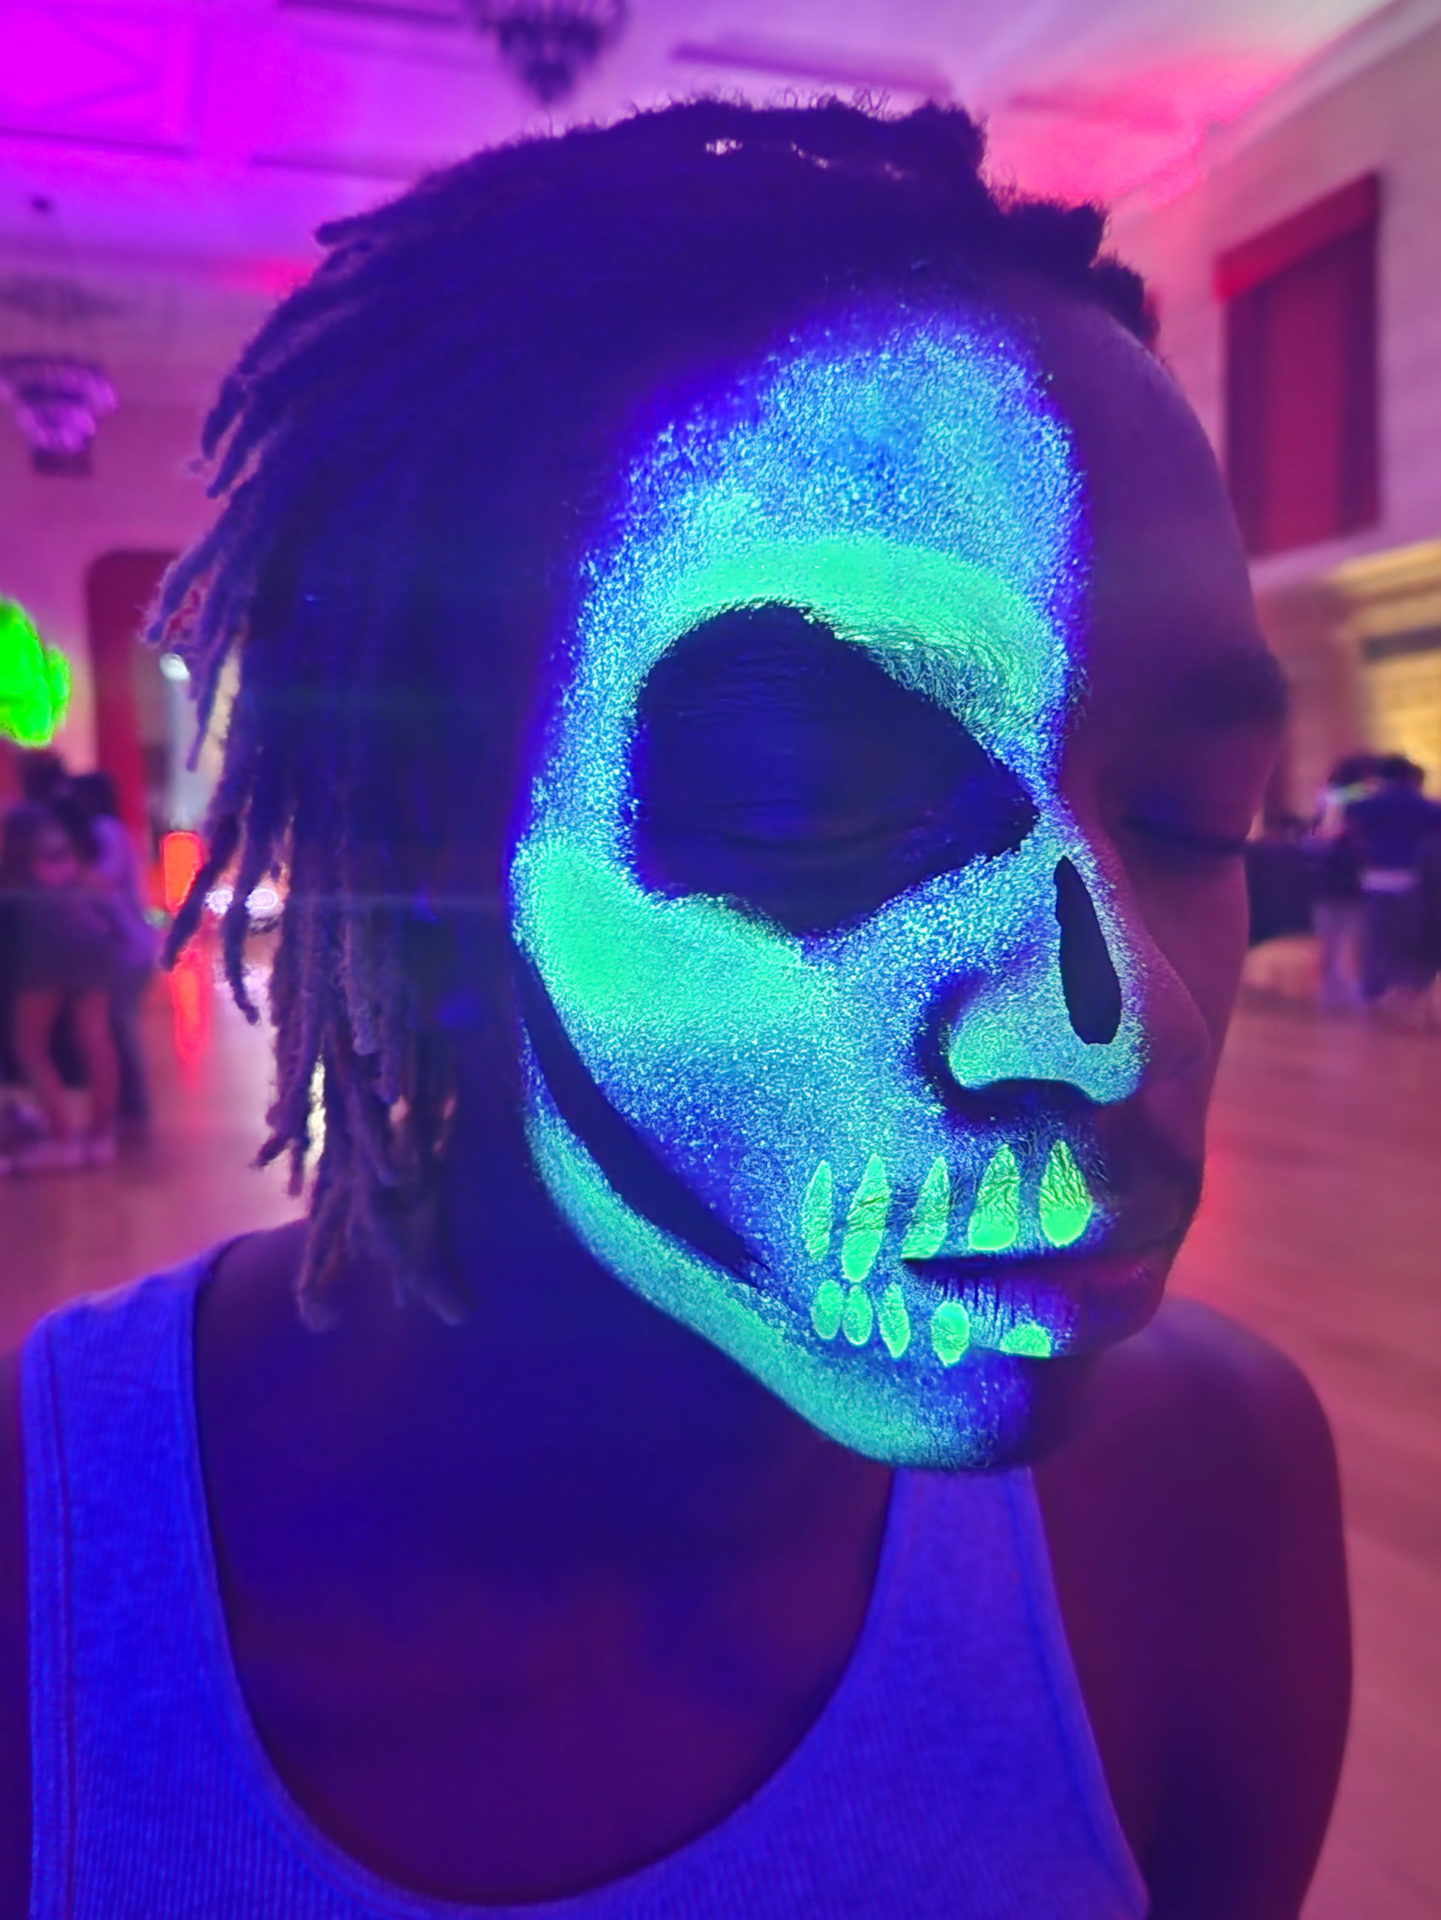 Blacklight face painting party